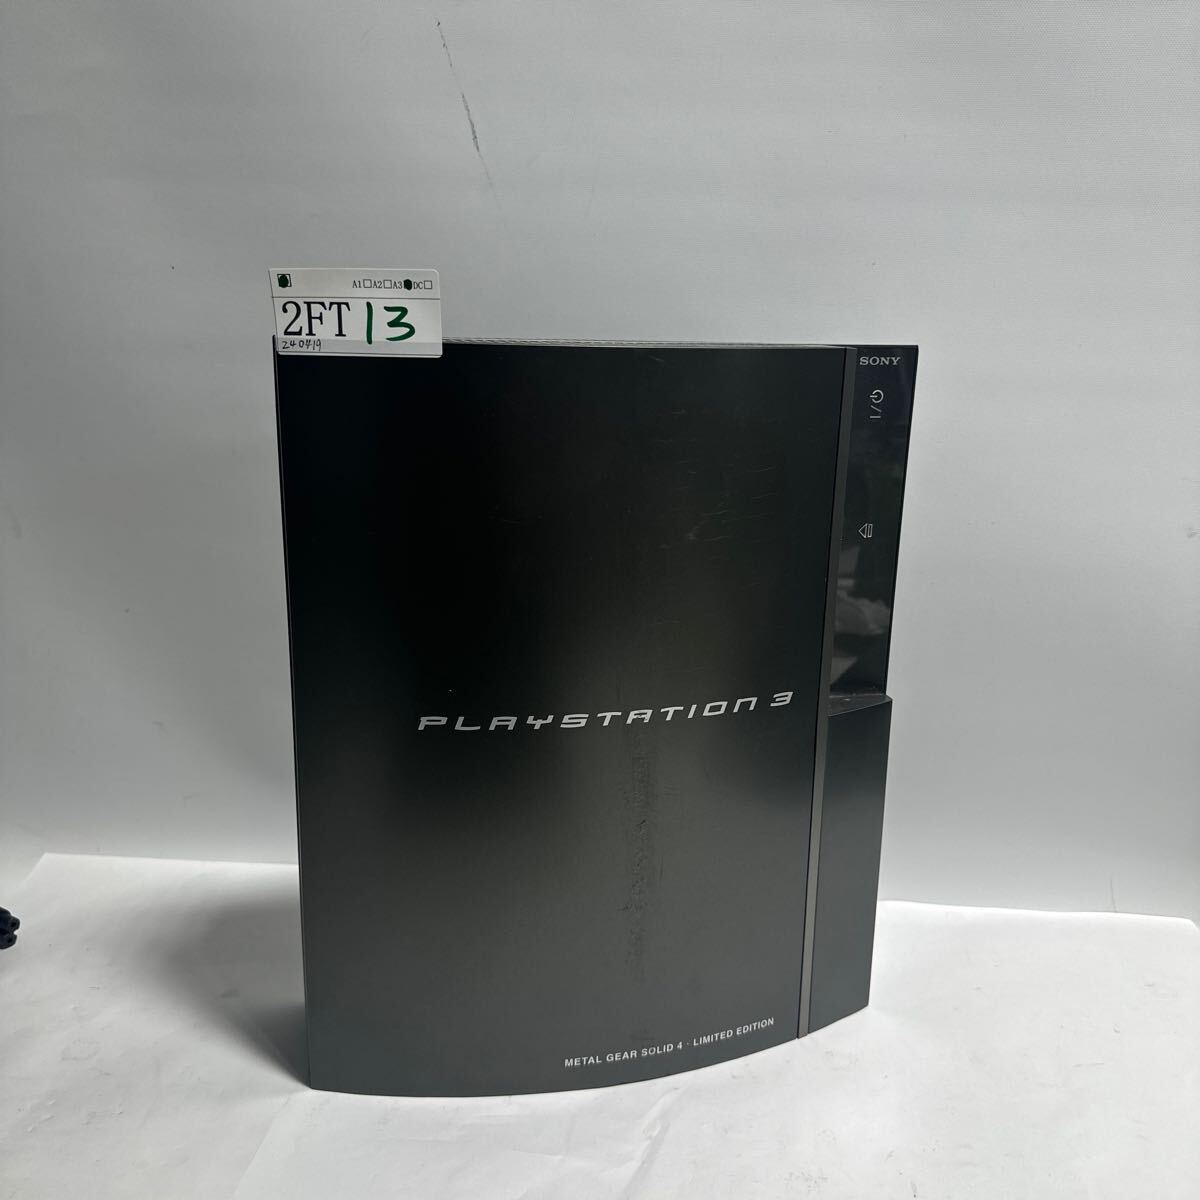 「2FT13」PS3 本体 40GB METAL GEAR SOLID 4 LIMITED EDITION CECHH00 初期化済 動作品 コントローラー無し本体のみ(240419)の画像1